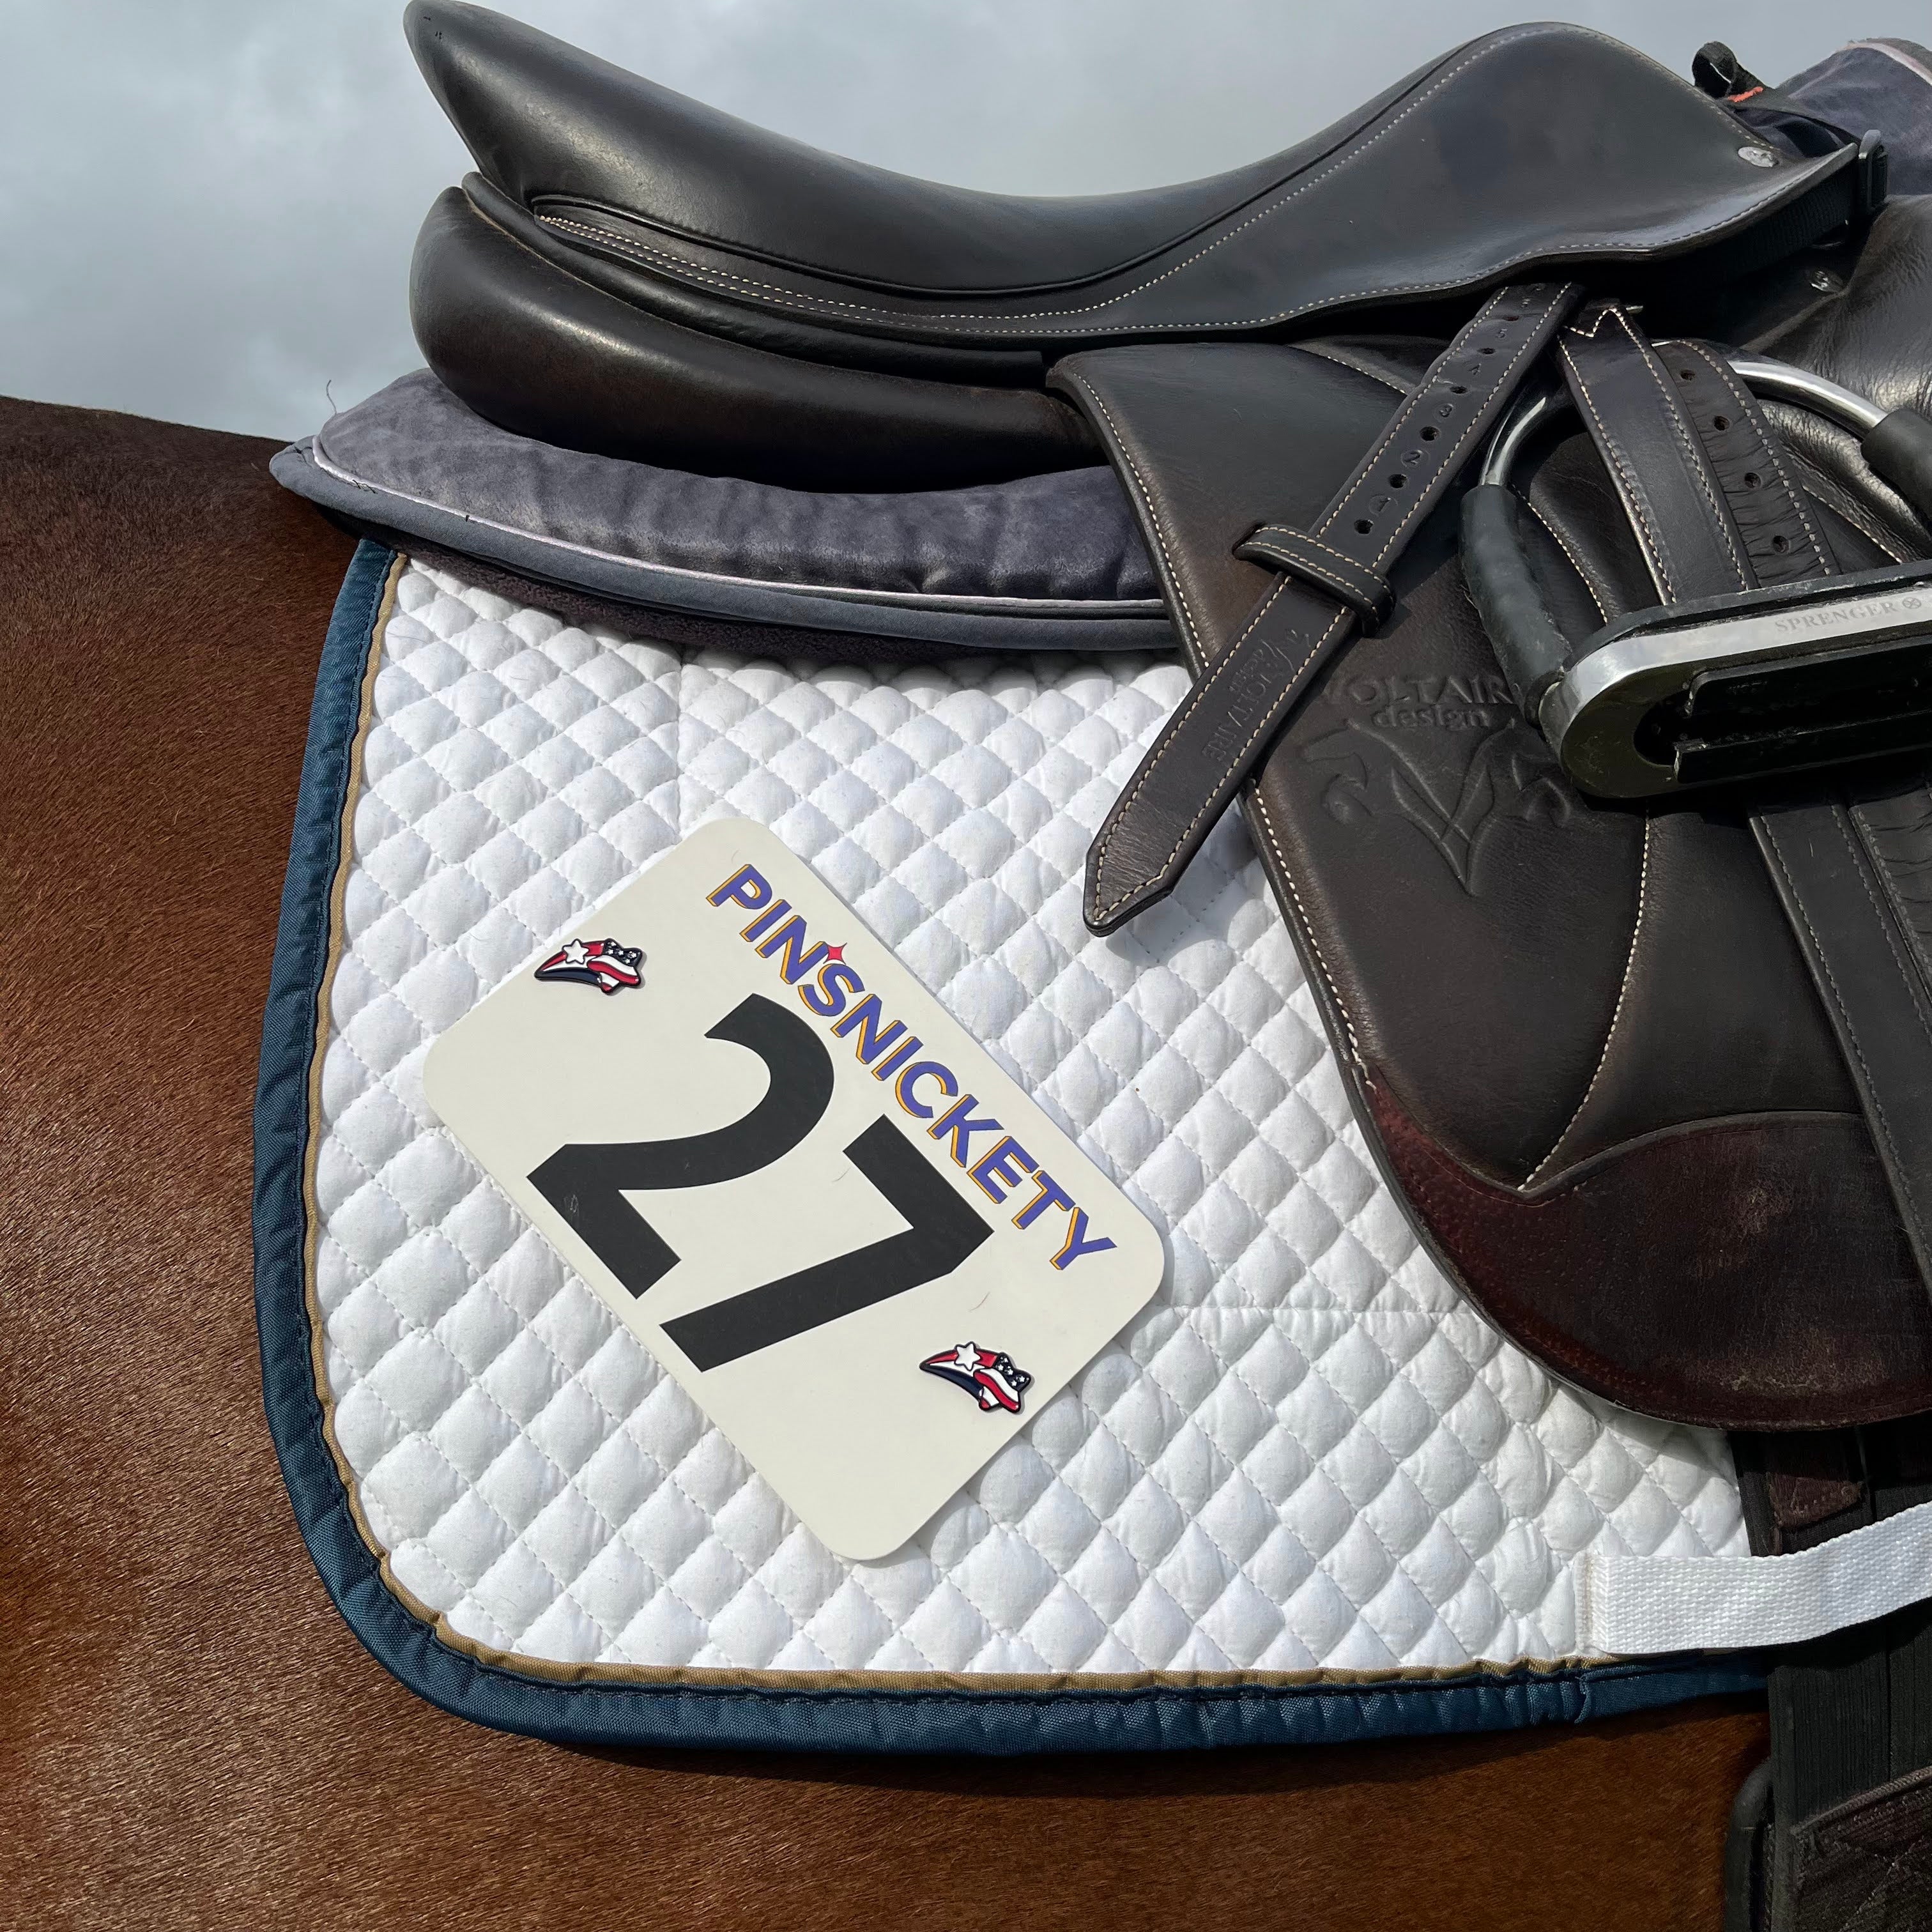 pinsnickety stars and stripes horse show number pins on a saddle pad